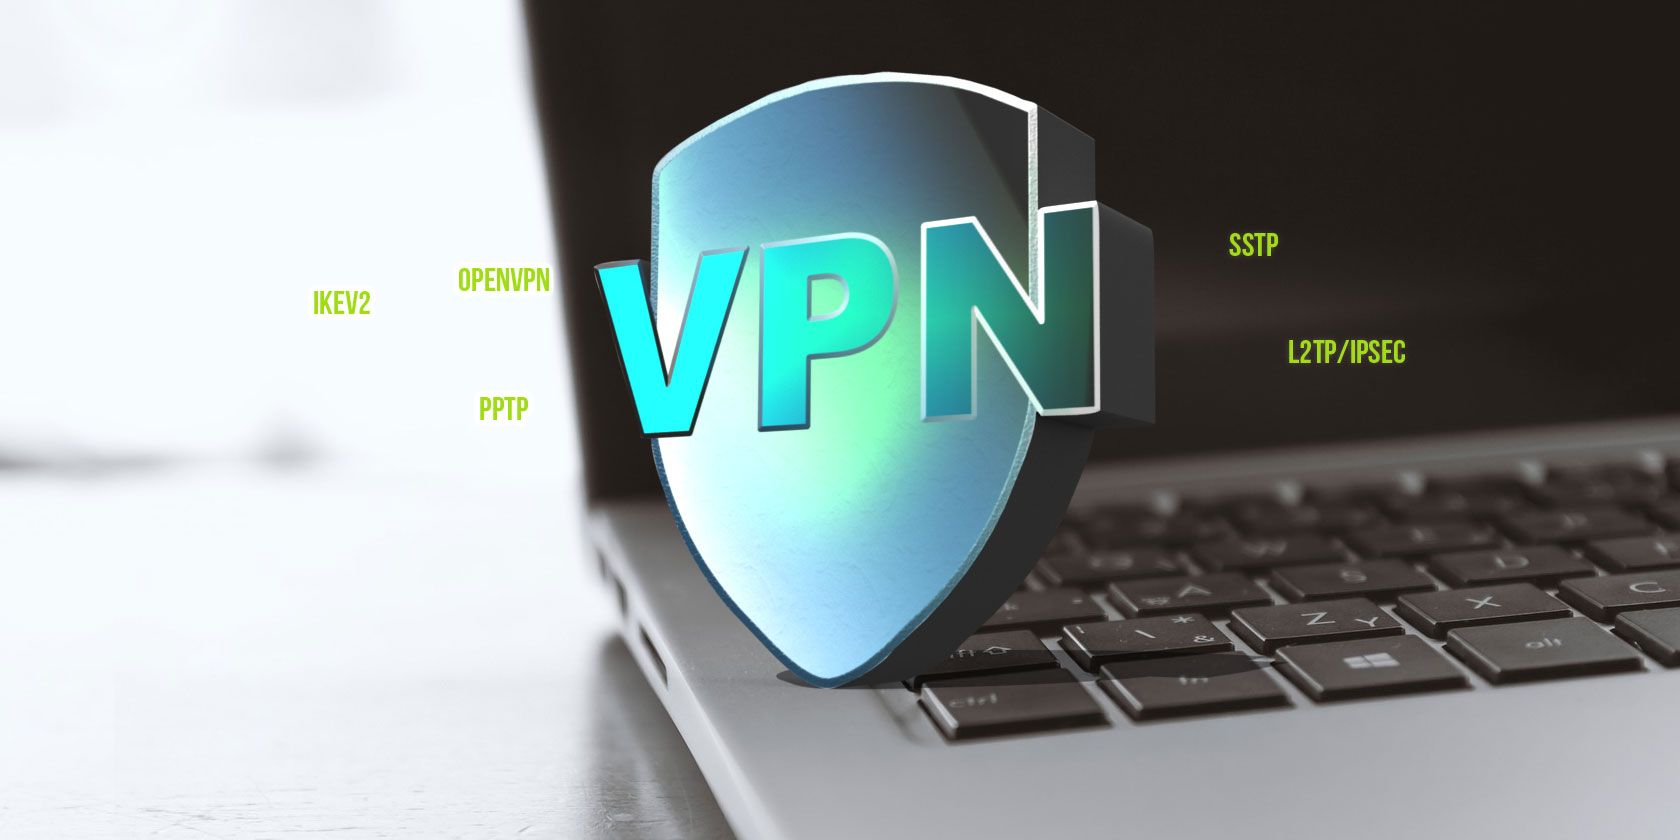 standards and protocols used in vpns are in their infancy and seldom used